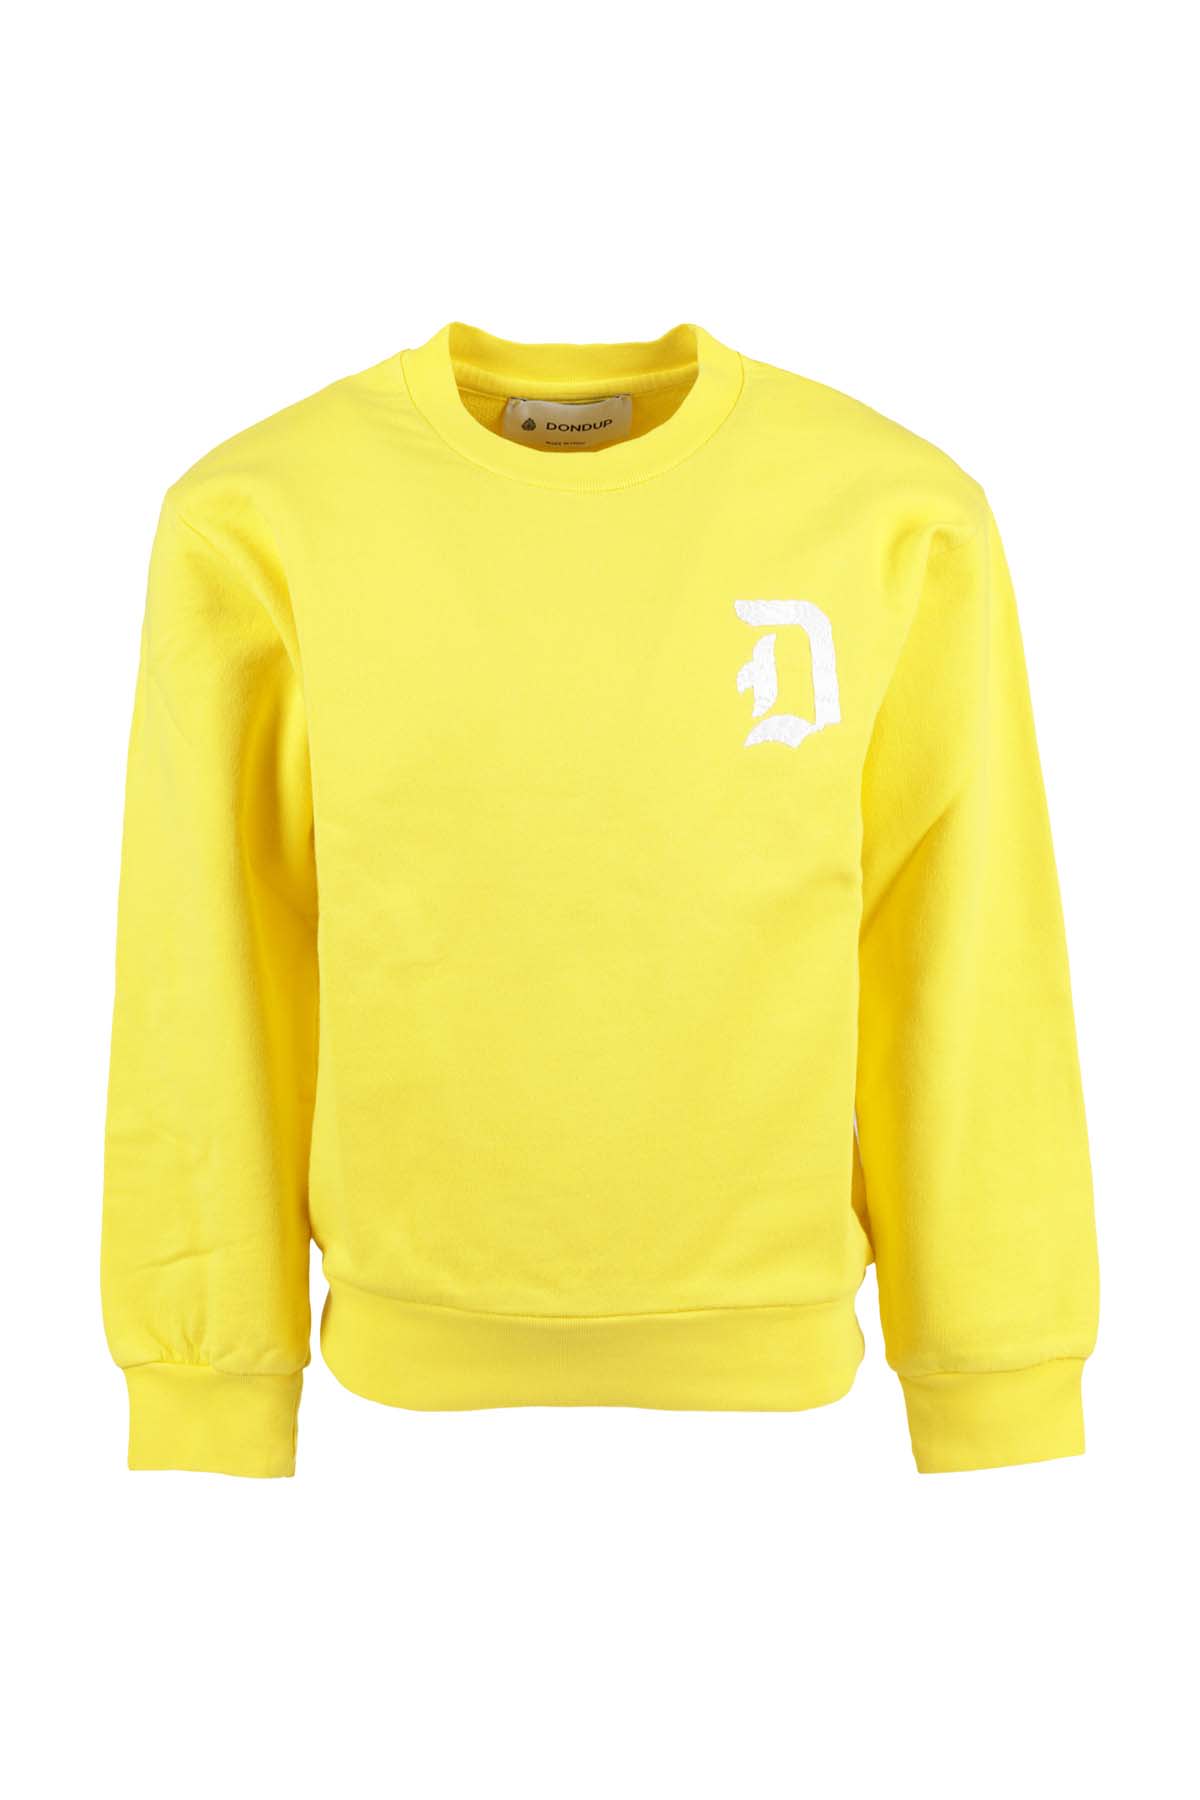 DONDUP SWEATER,DMFE52FE144WD023 2004 GIALLO